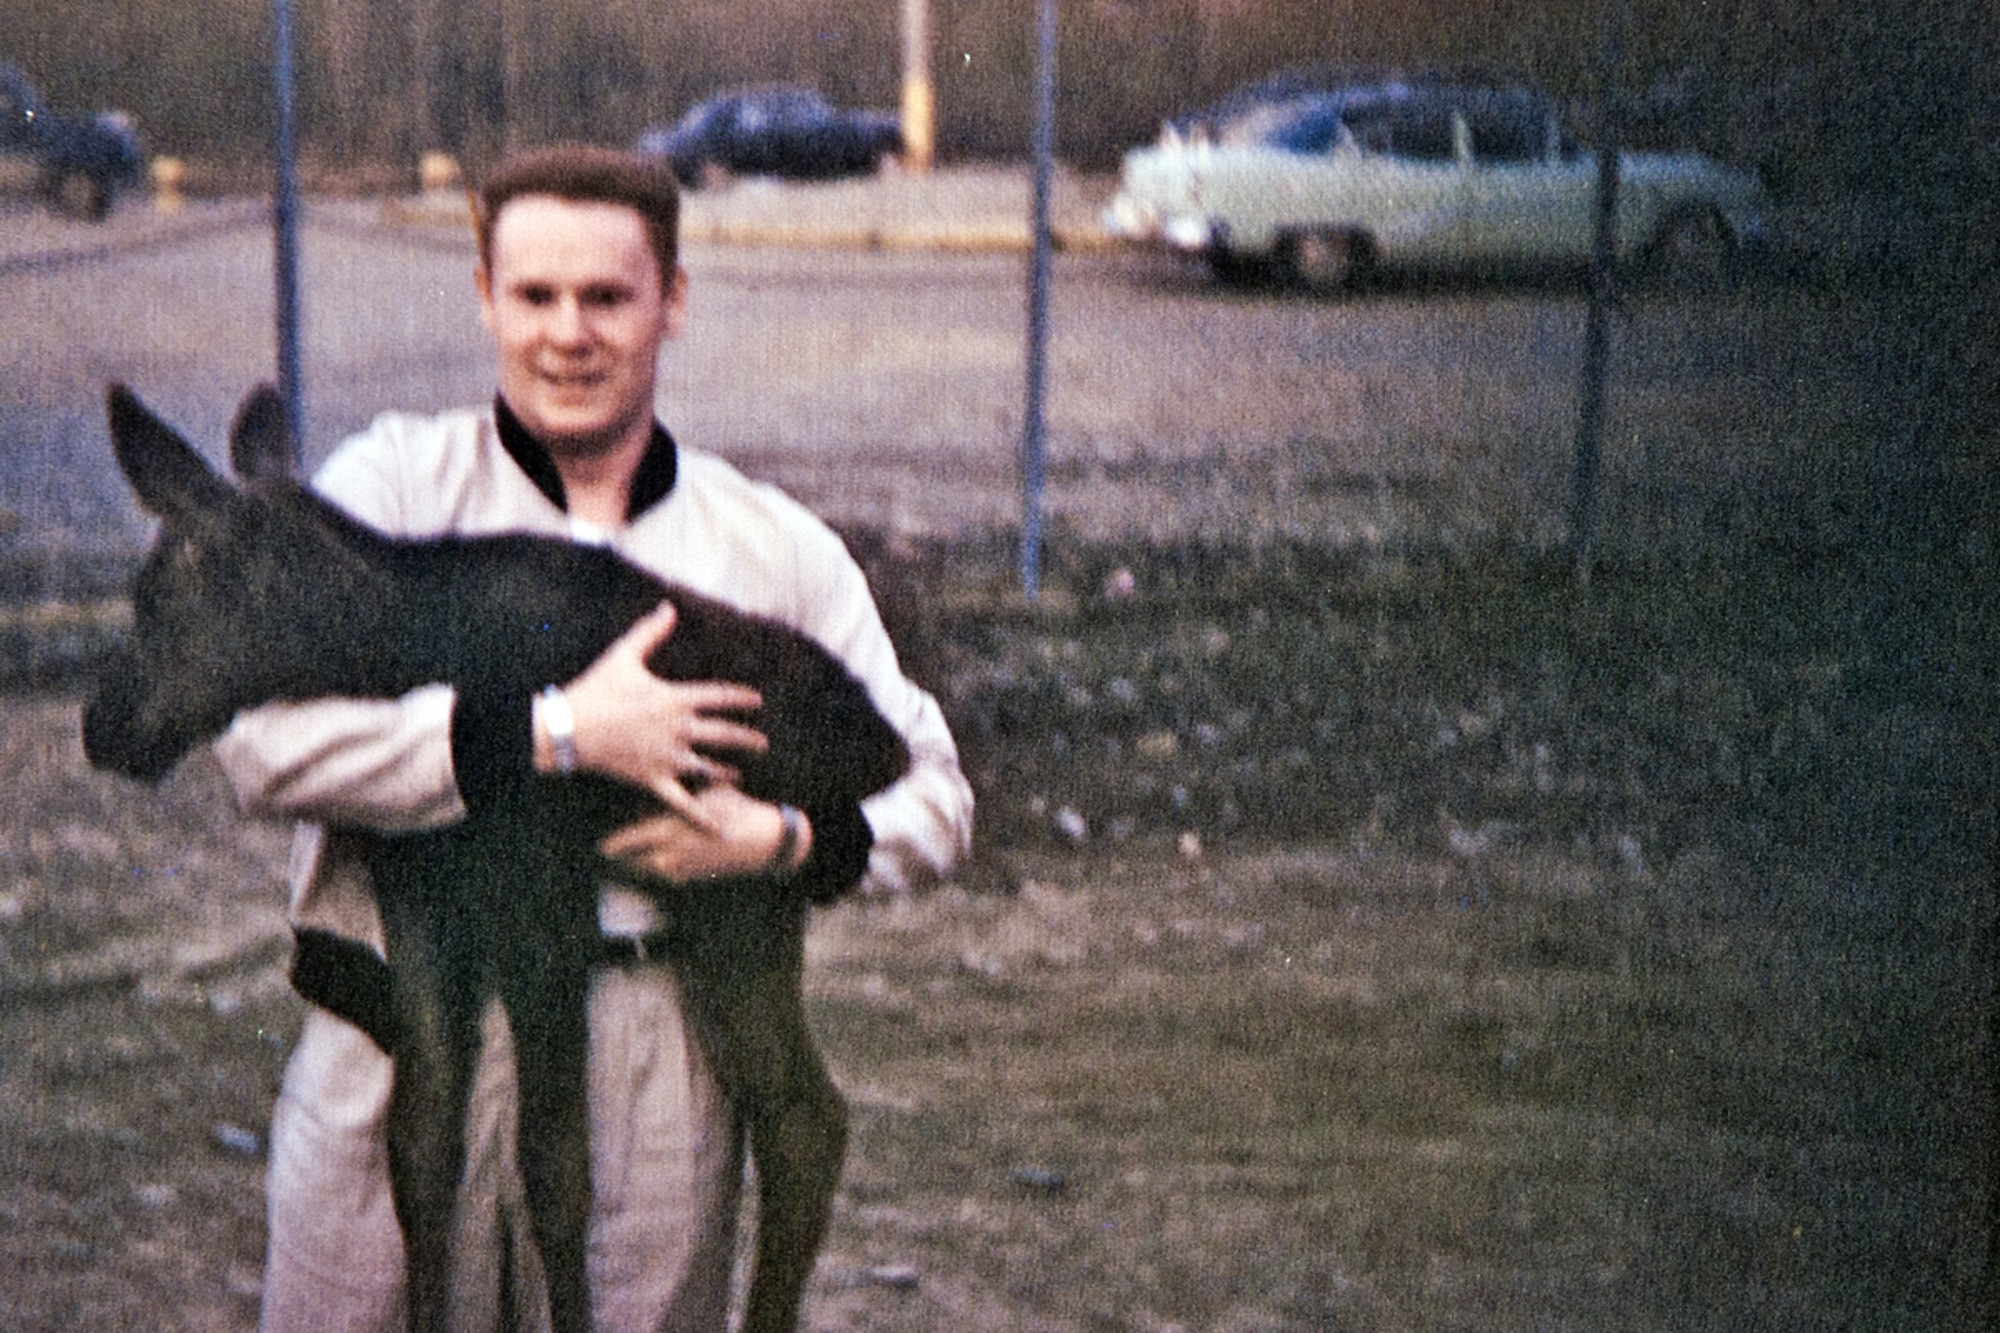 Airman 2nd Class Forrest St. Aubin holds a female moose calf during his time at
Elmendorf Air Force Base in the early 1950s. The calf was found orphaned behind the
squadron headquarters building, and Airmen of the 3rd Radio Squadron Mobile fed it from their own rations for the spring and summer, and released it back into the wild that fall, St. Aubin said. (Photo courtesy Forrest St. Aubin)